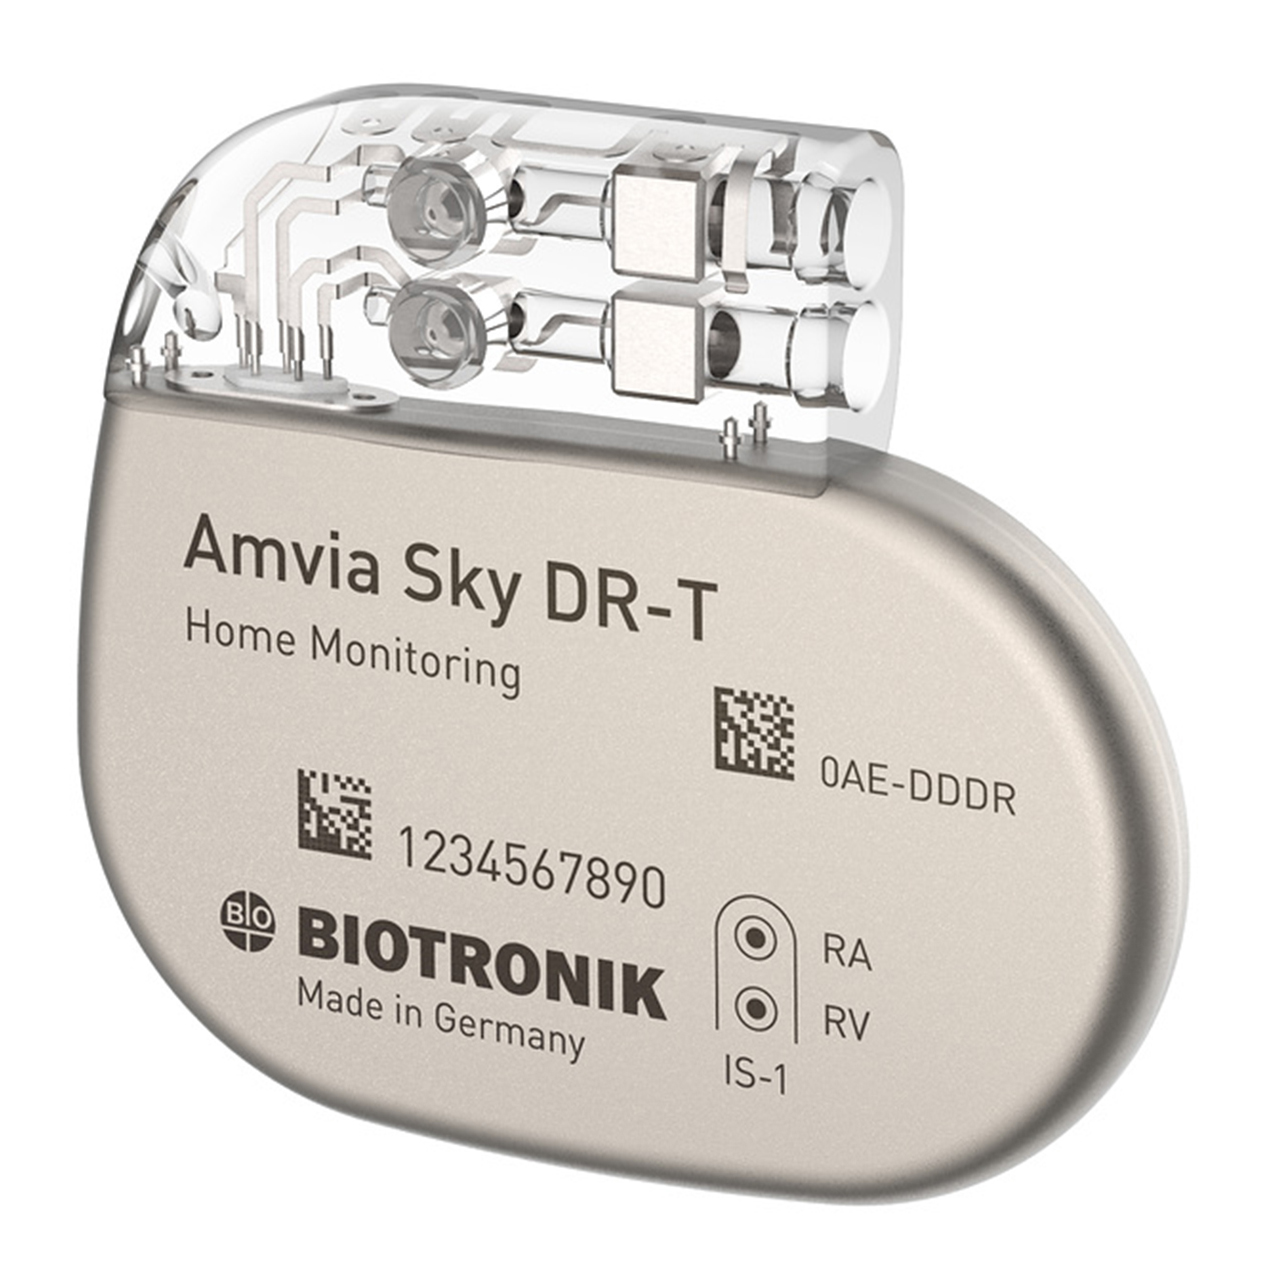 Amvia Sky DR-T dual-chamber pacemaker